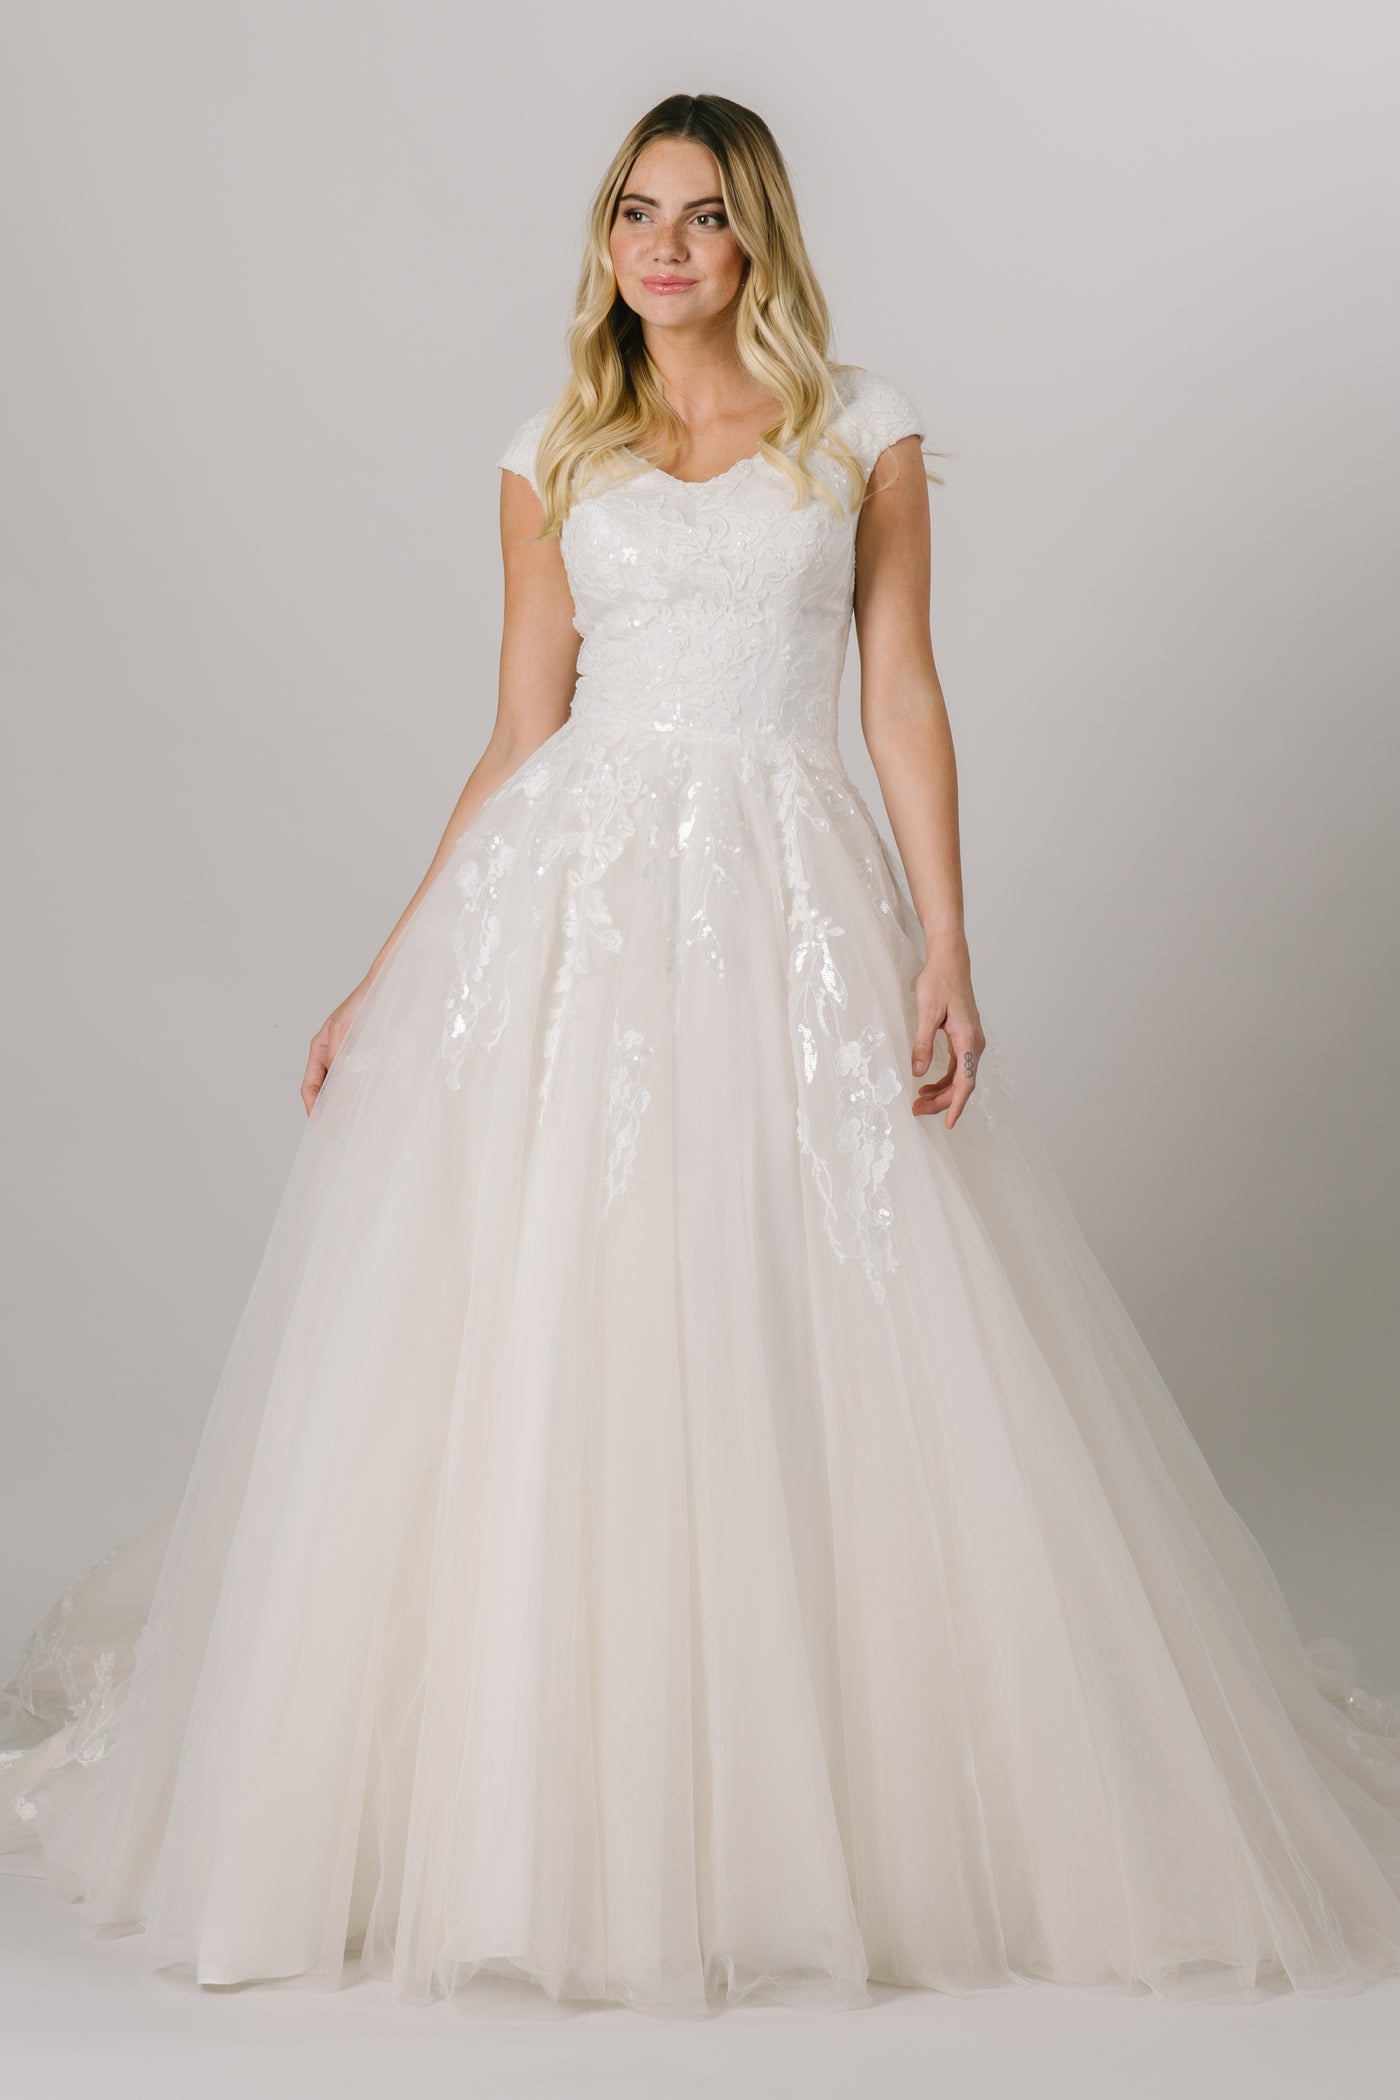 This modest ballgown wedding dress features a flattering fit and gorgeous sparkly floral lace throughout the bodice and trickling down the skirt. It has a soft v-neck and buttons down the back! Available in Ivory and Ivory/Champagne (pictured).  Style Love: Appliques from the top and bottom meet at the middle of the skirt!